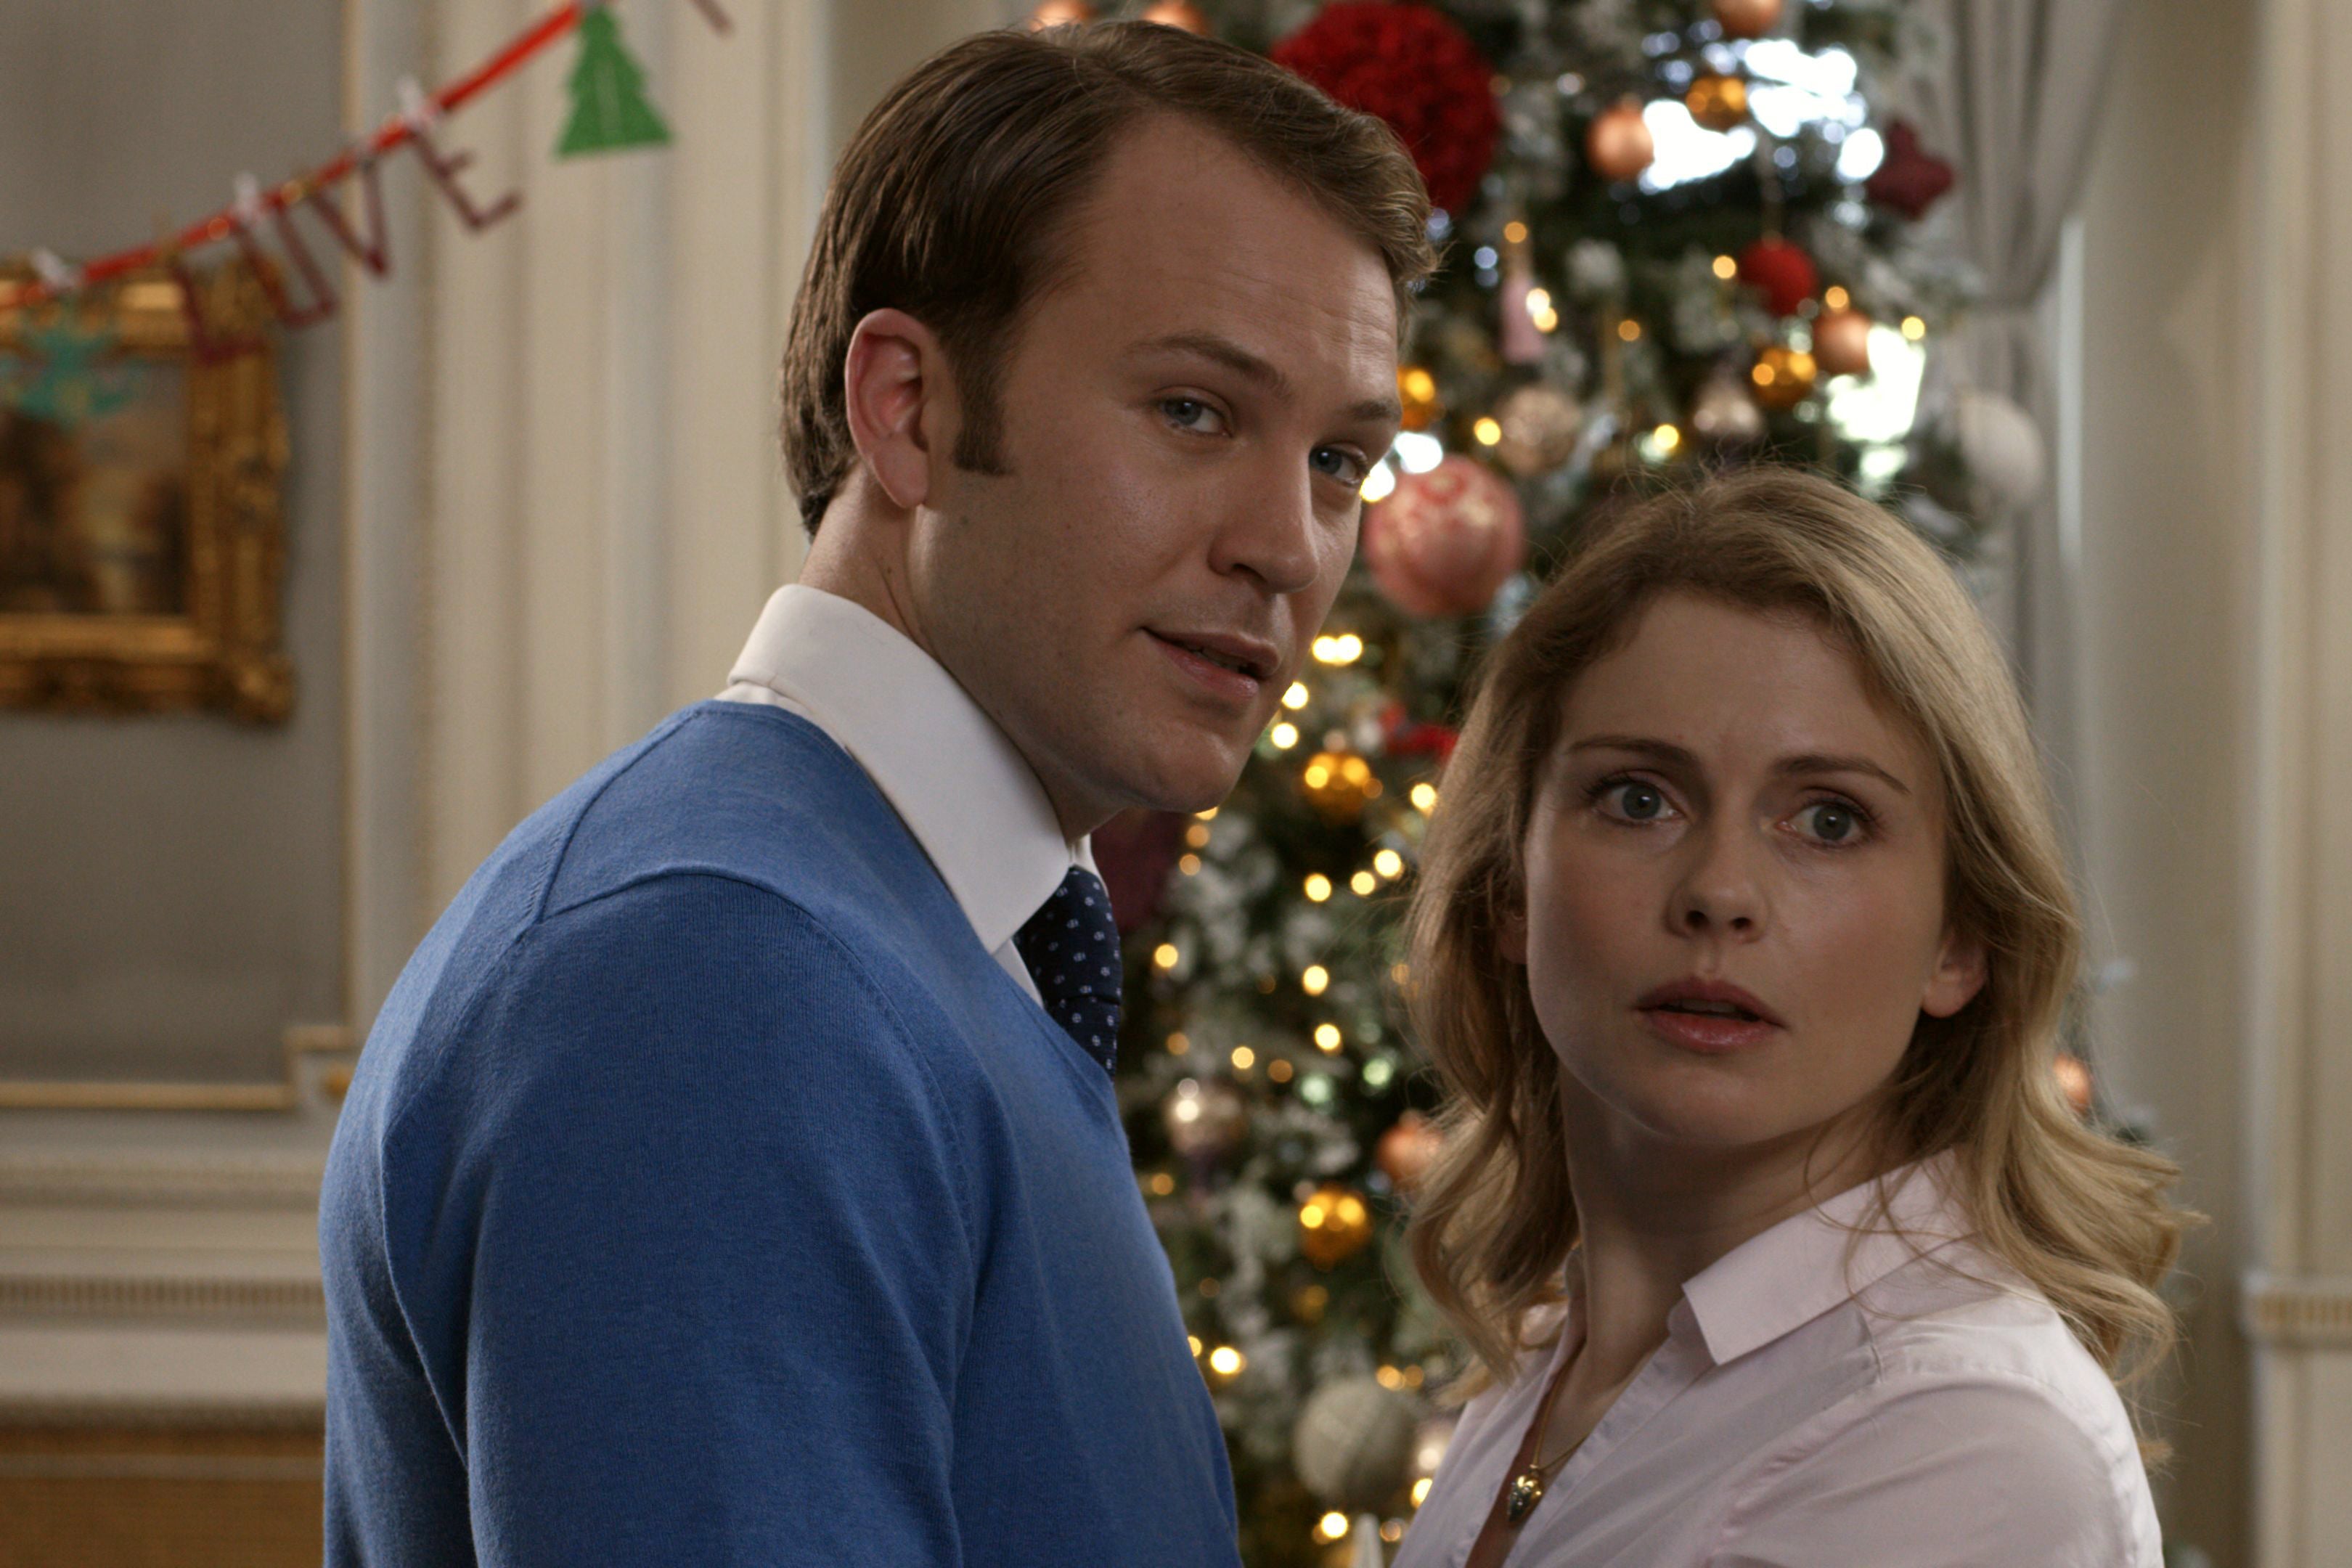 Ben Lamb and Rose McIver in a production still from the Netflix movie A Christmas Prince: The Royal Wedding. They stand facing each other in front of a Christmas tree.